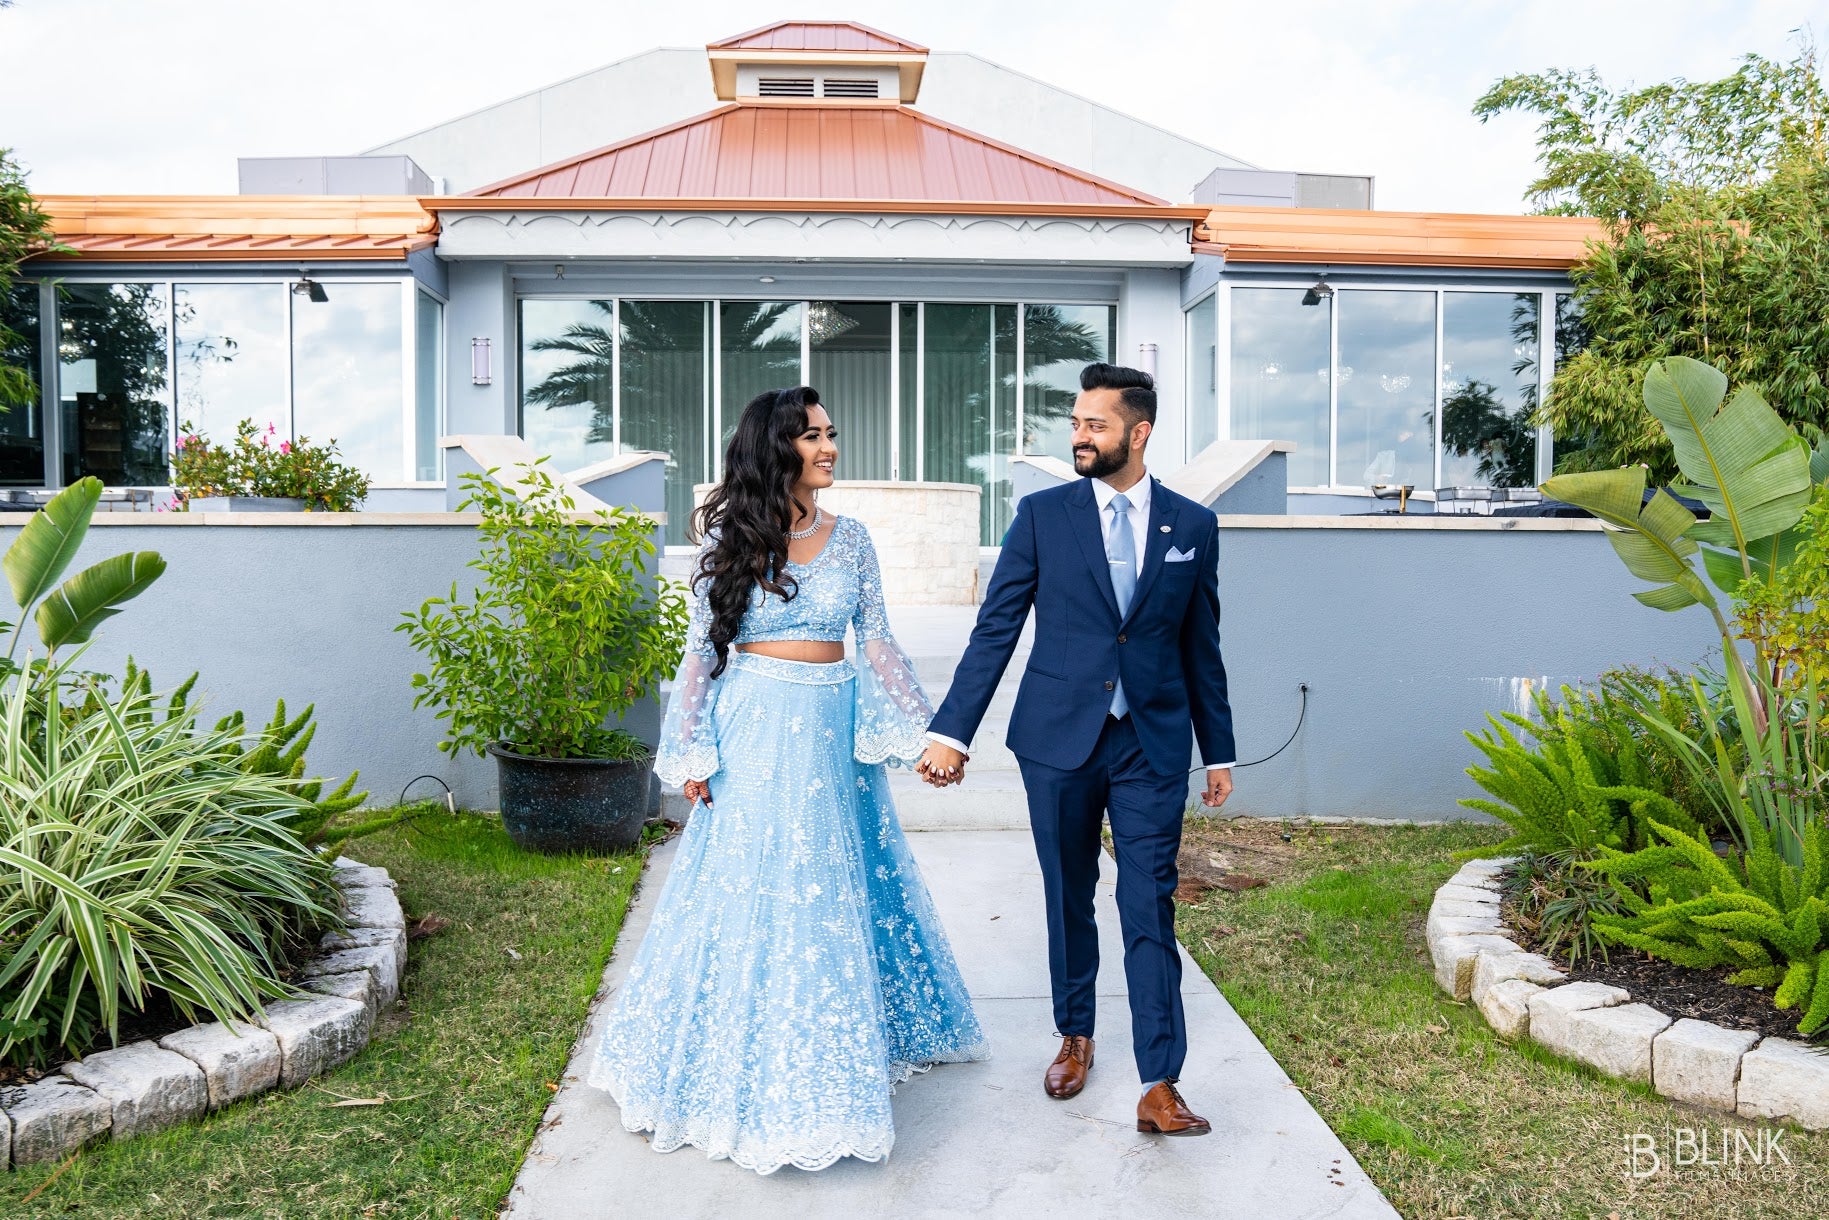 An Intimate, Nature Filled South Asian Wedding